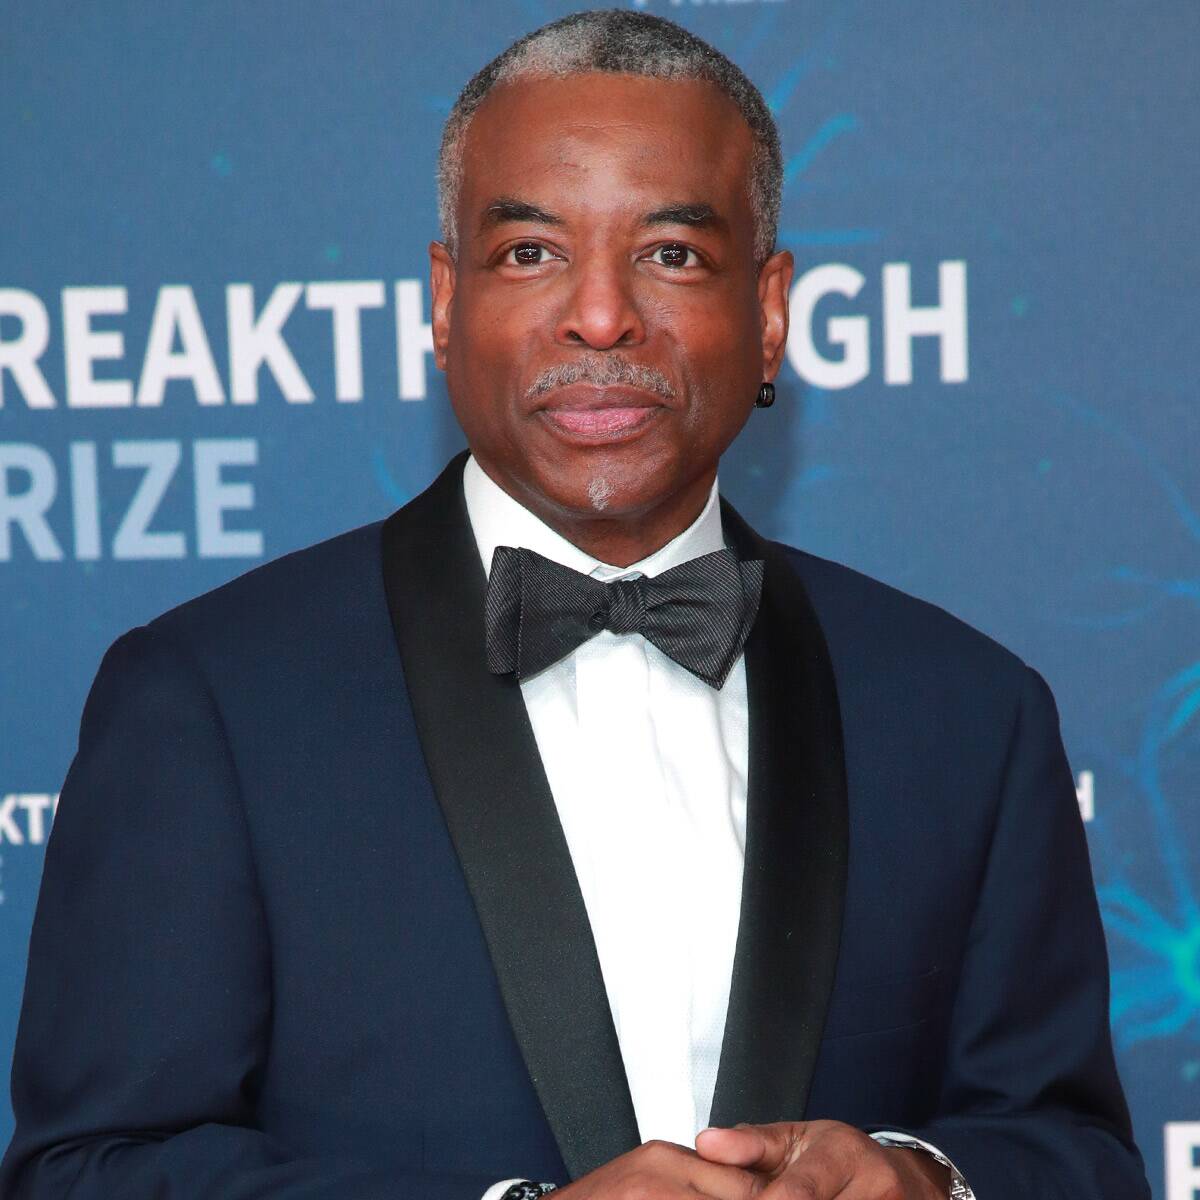 LeVar Burton Shares Petition to Become the Next Jeopardy! Host